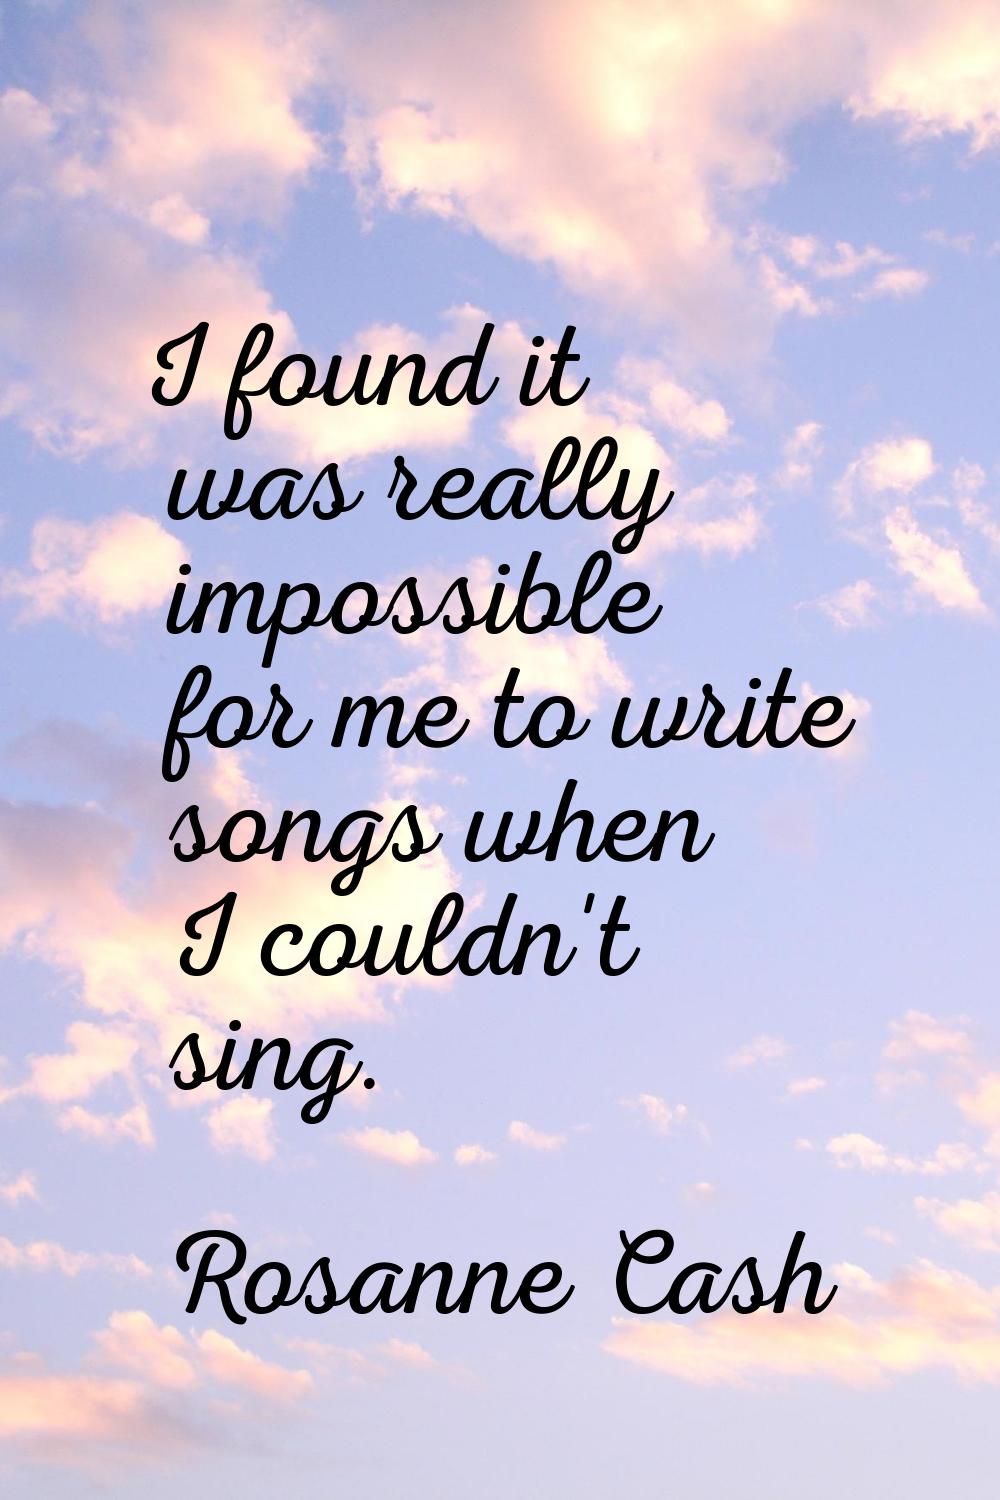 I found it was really impossible for me to write songs when I couldn't sing.